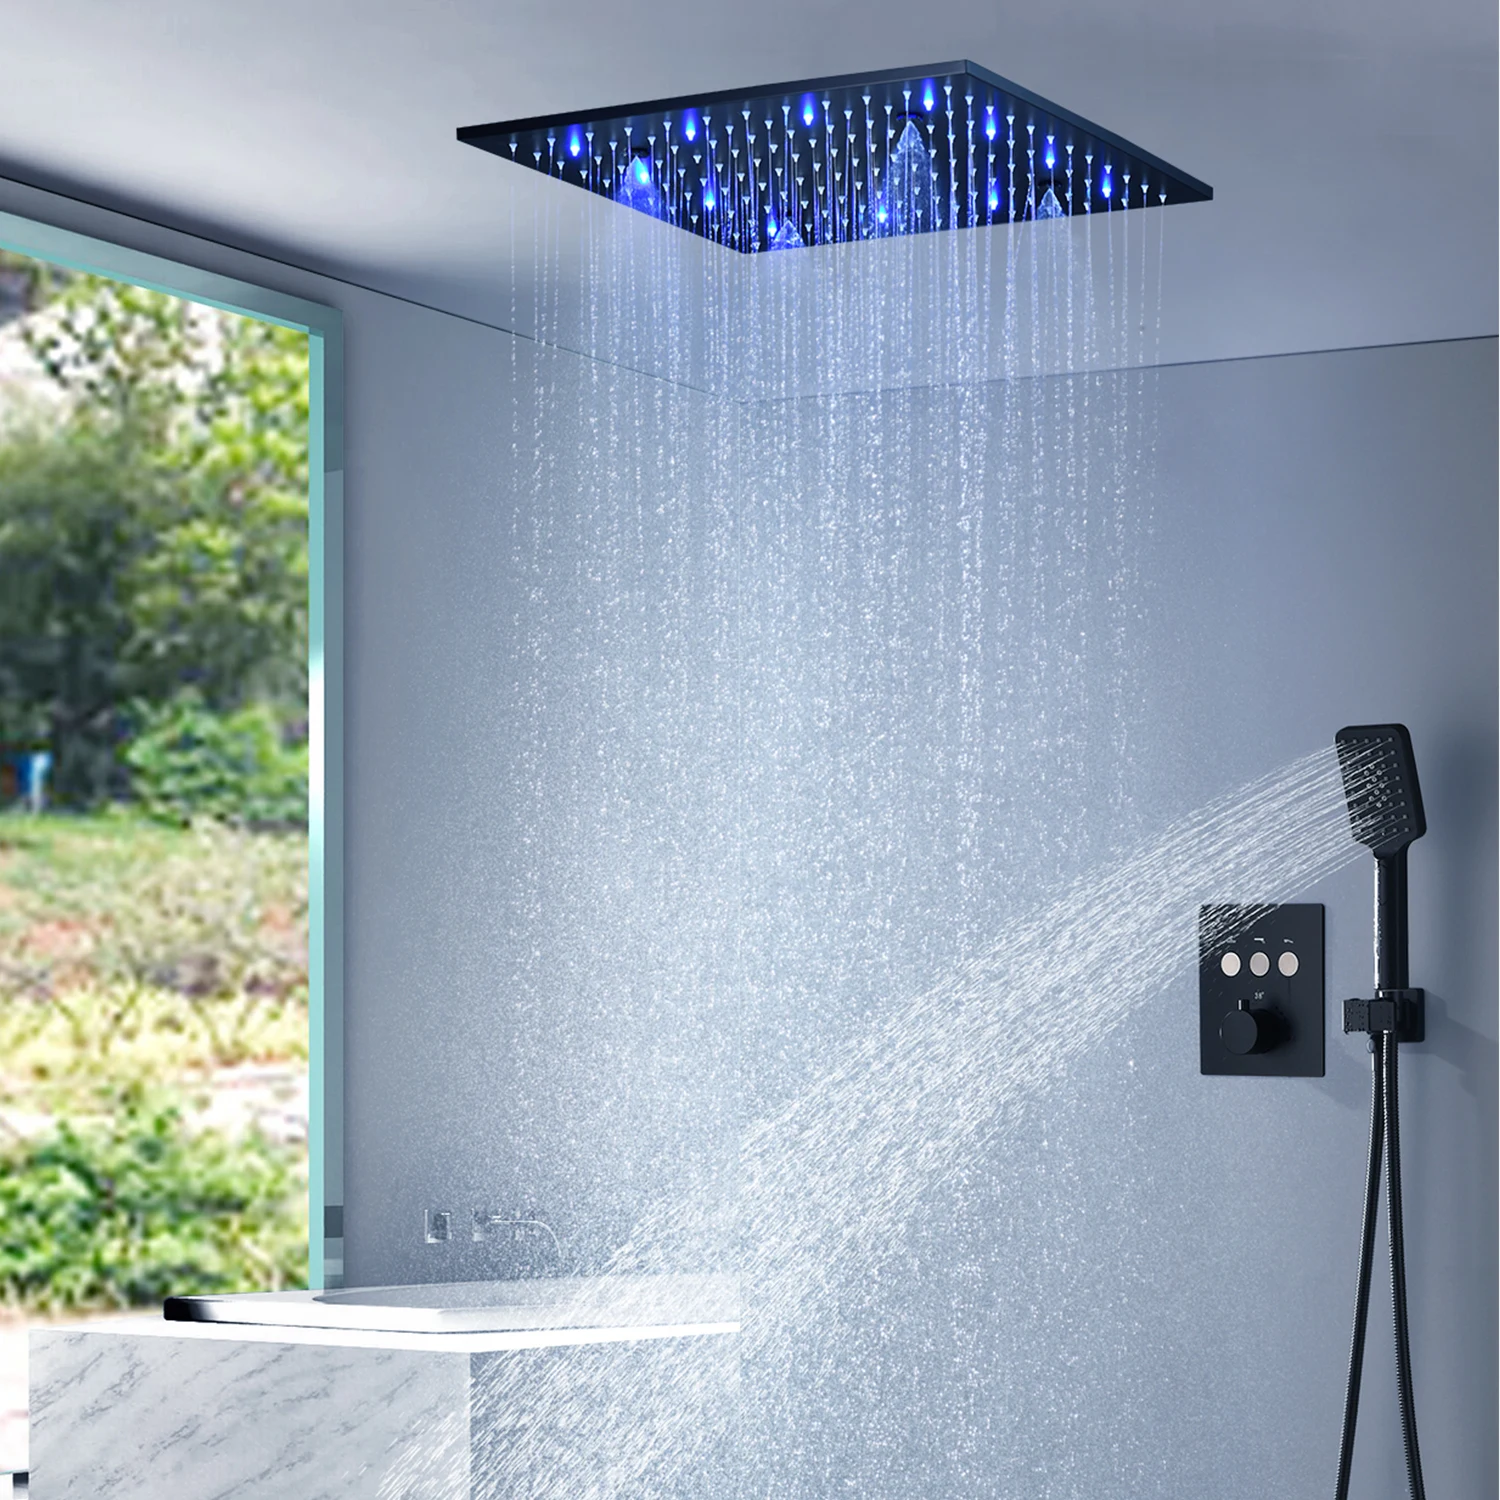 

hm Bathroom Black LED Shower Set 16Inches/20Inchs Misty Rainfall ShowerHead Panel Button Thermostatic Mixer Faucets System